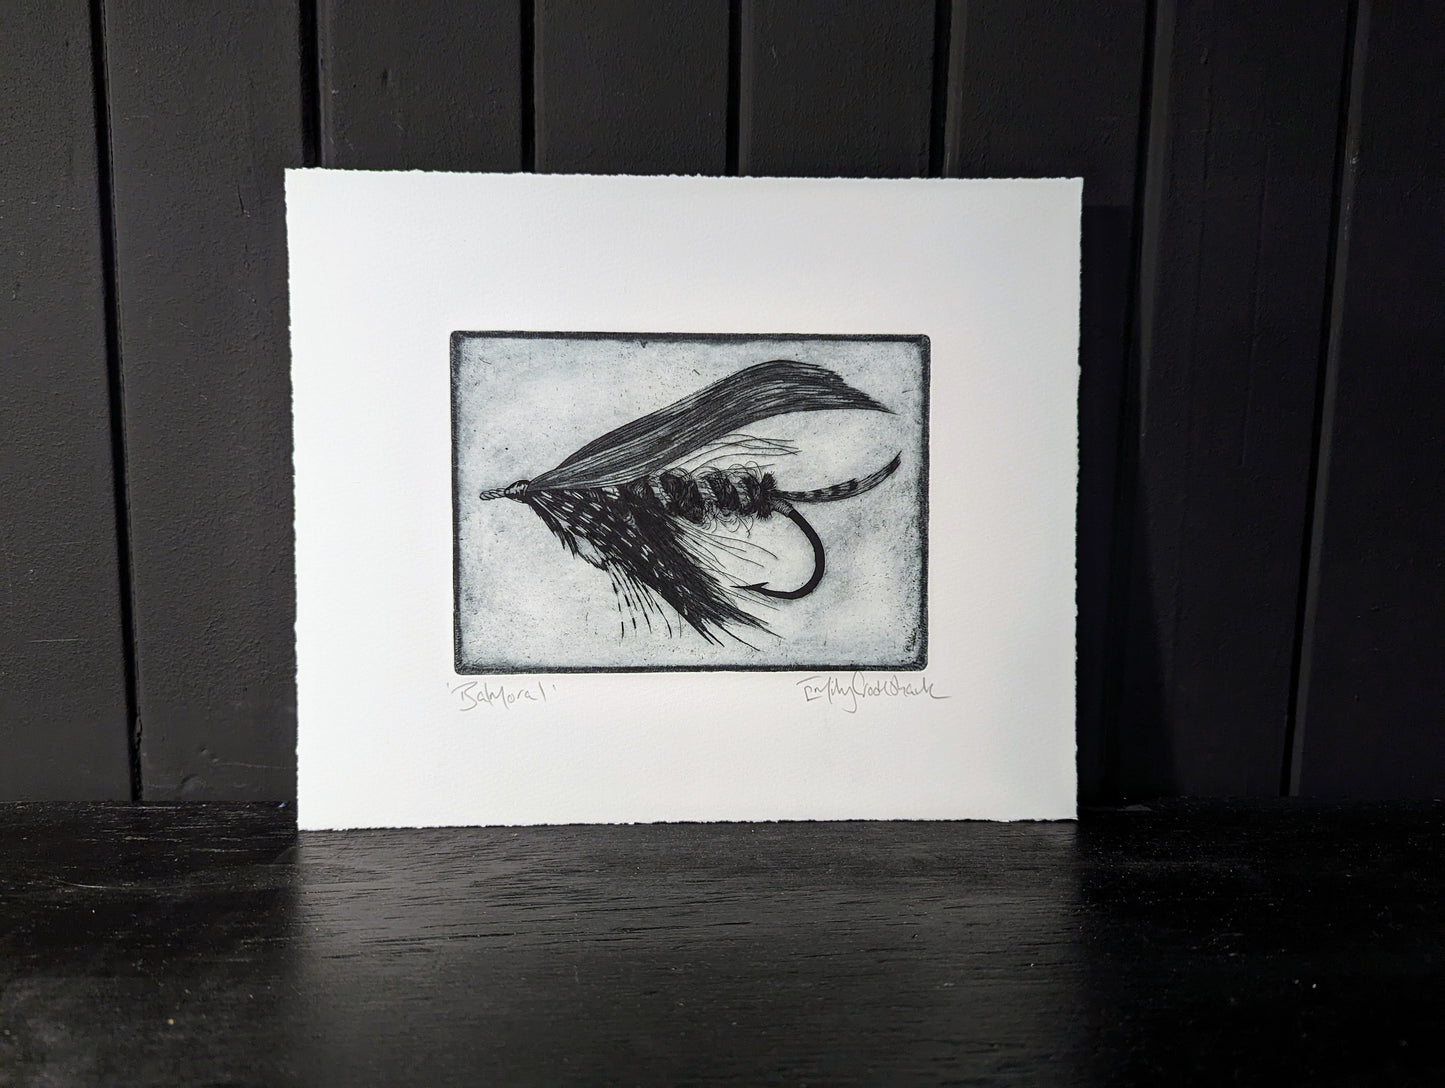 'Balmoral' Salmon Fly Etching